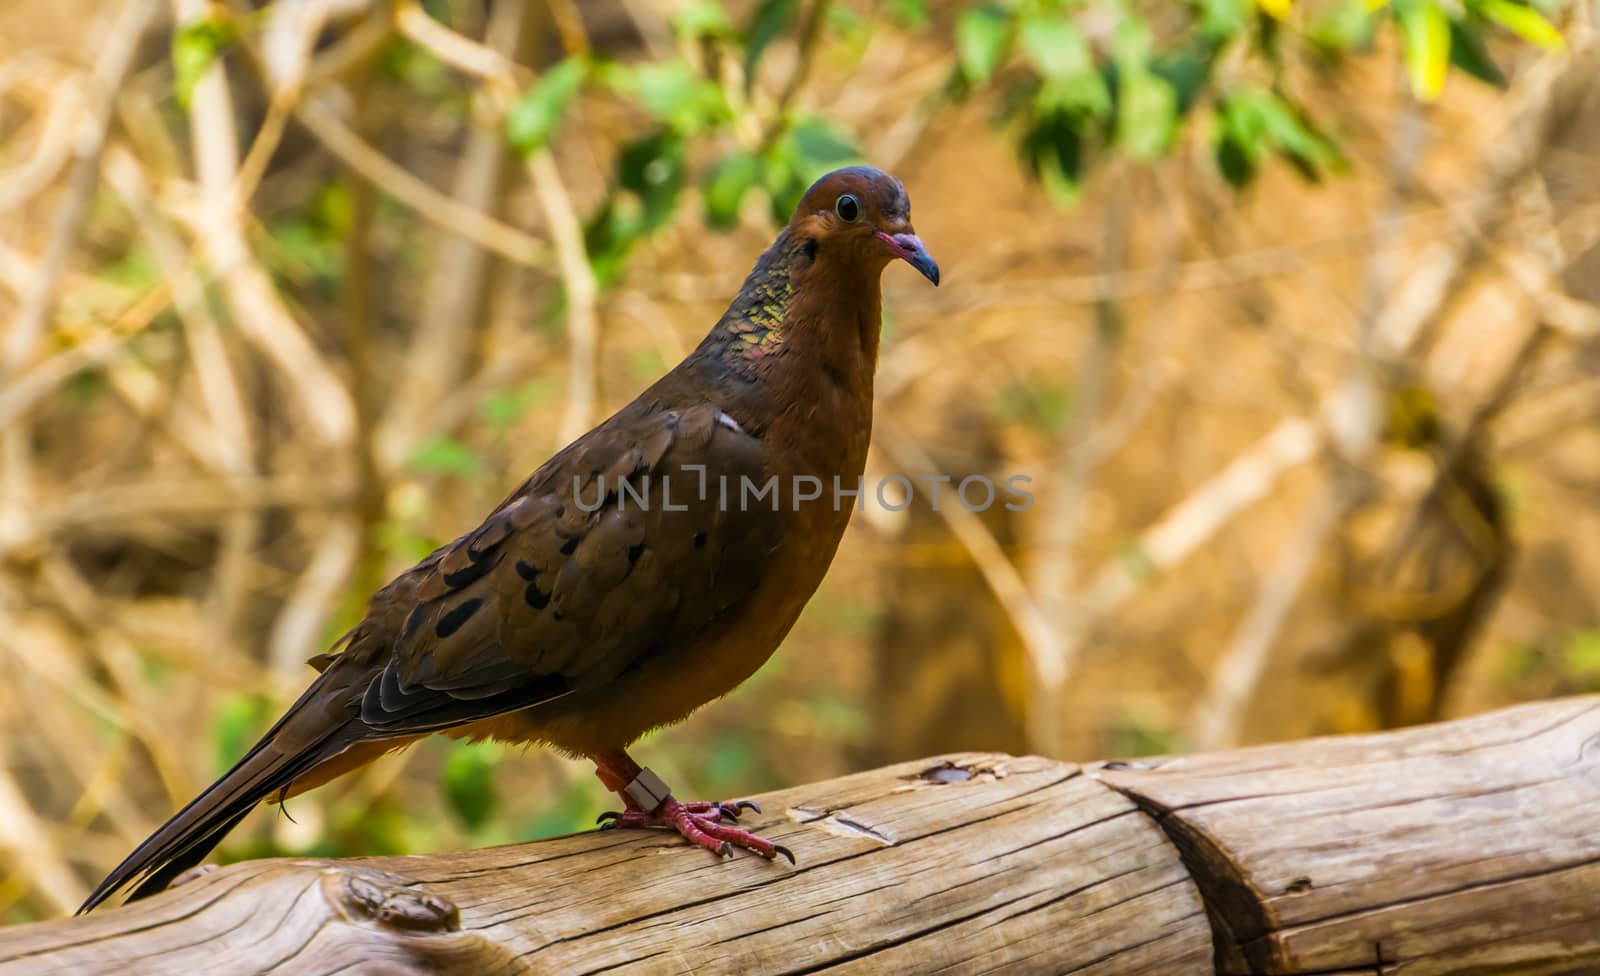 portrait of a socorro dove, Extinct in the wild, tropical pigeon that used to live on socorro island, Mexico